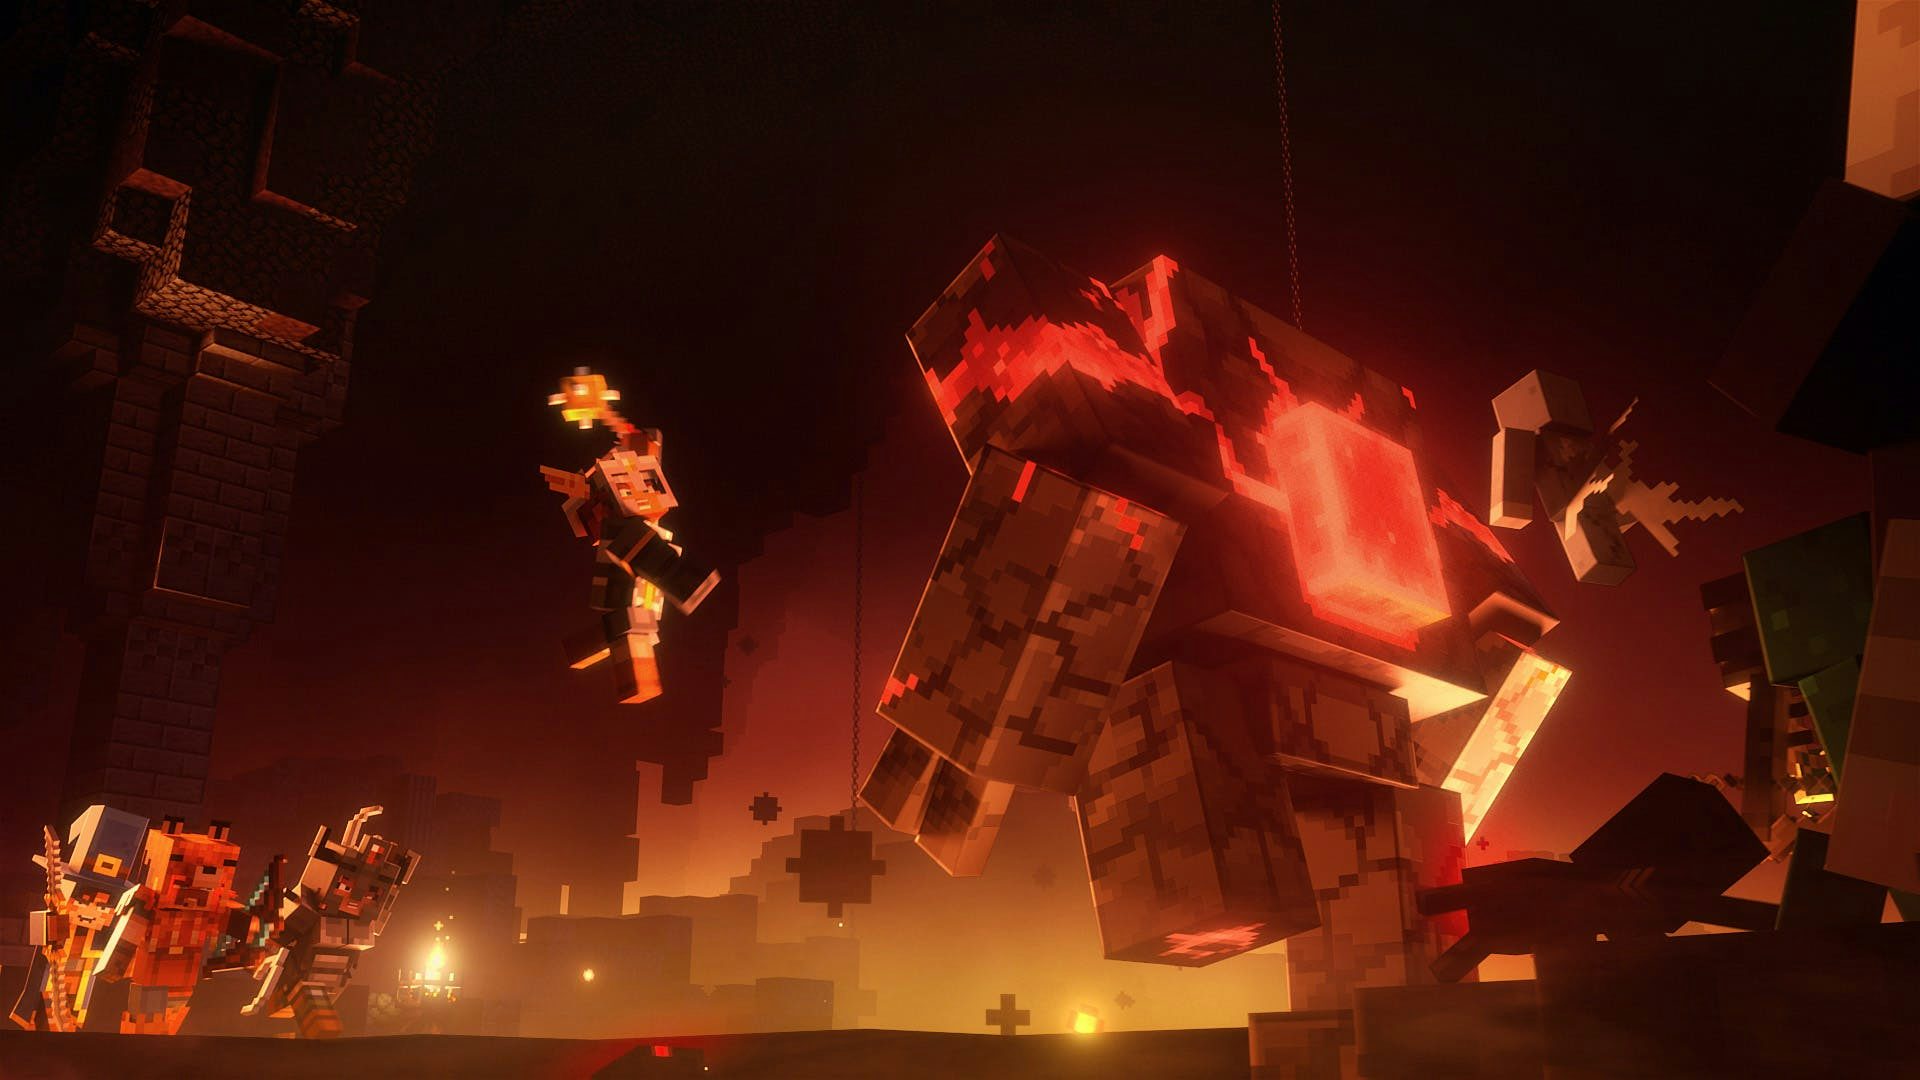 Valorie dressed in heroes armor doing a jump attack with a mace towards a redstone golem 